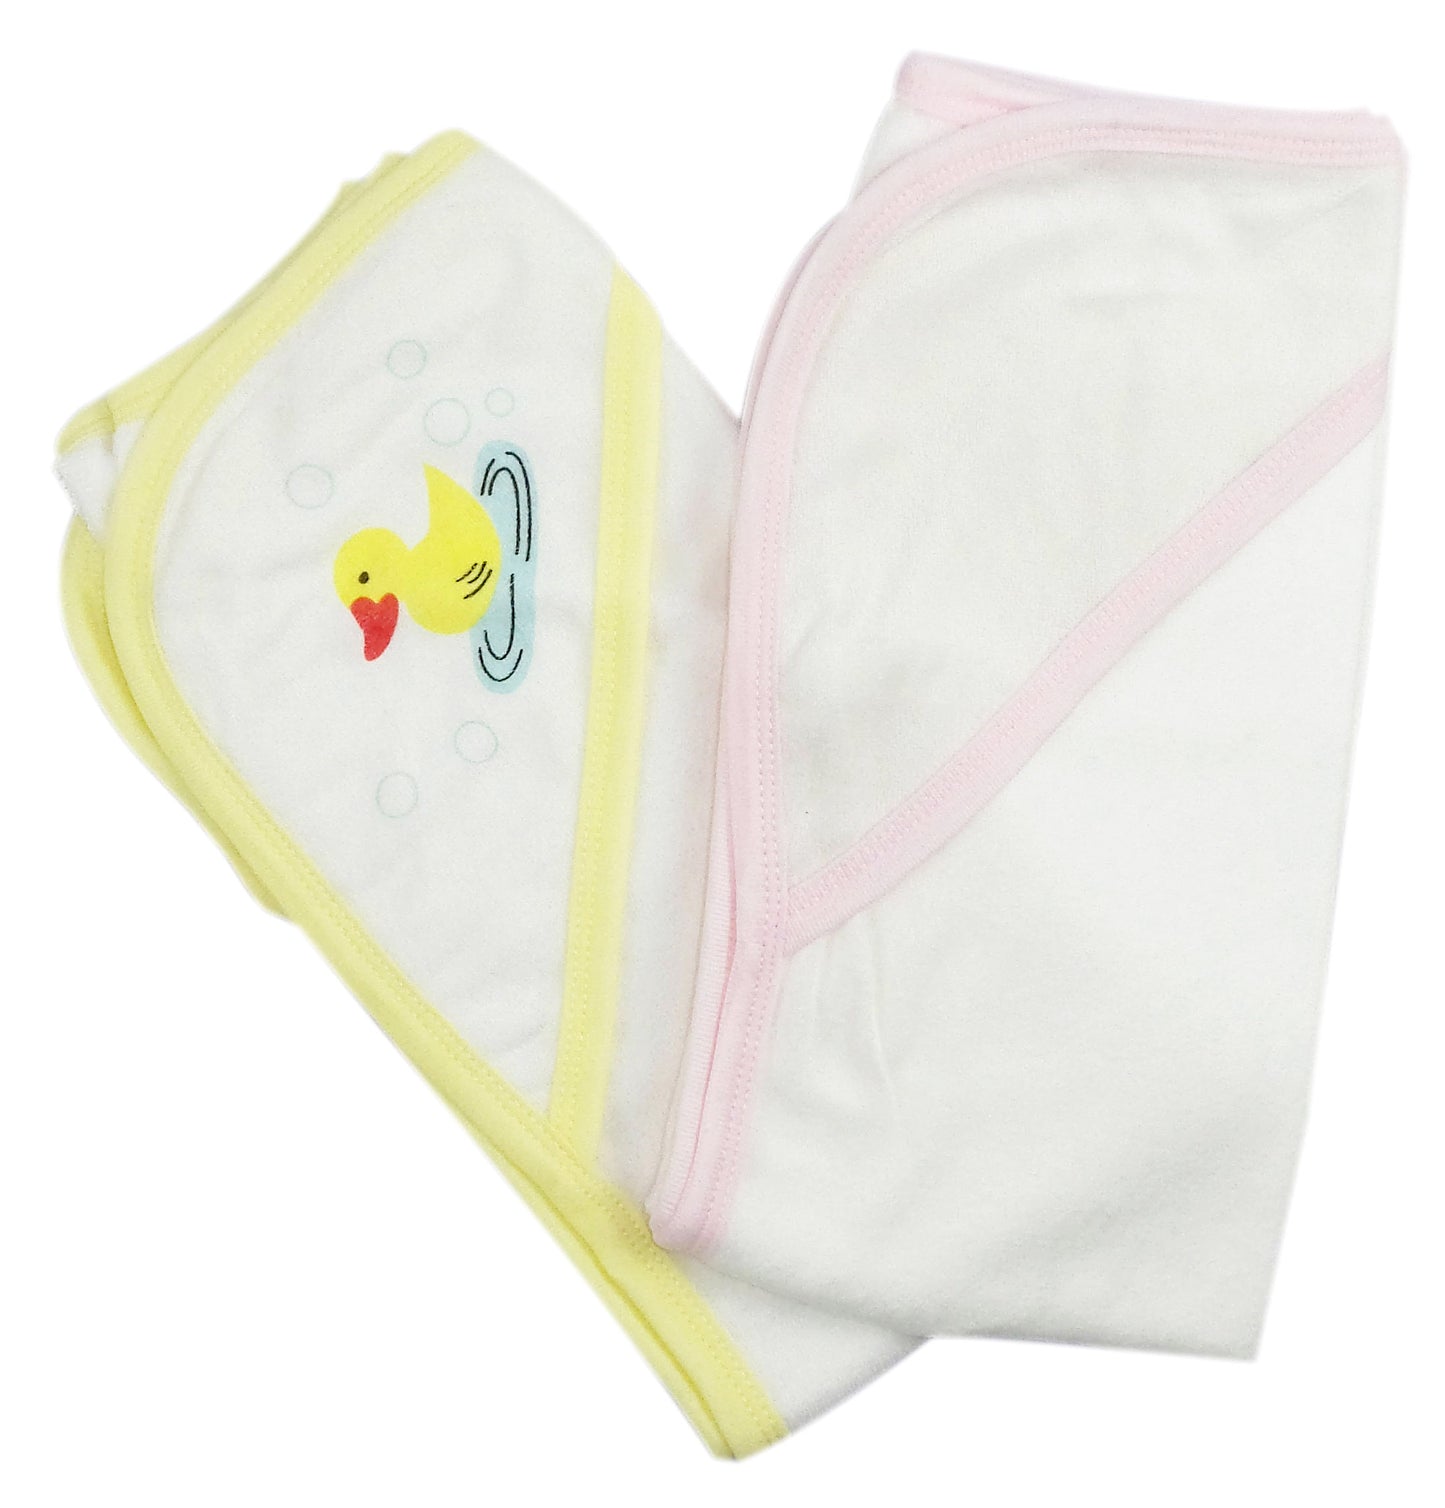 Infant Hooded Bath Towel (Pack of 2) 021-Yellow-021B-Pink